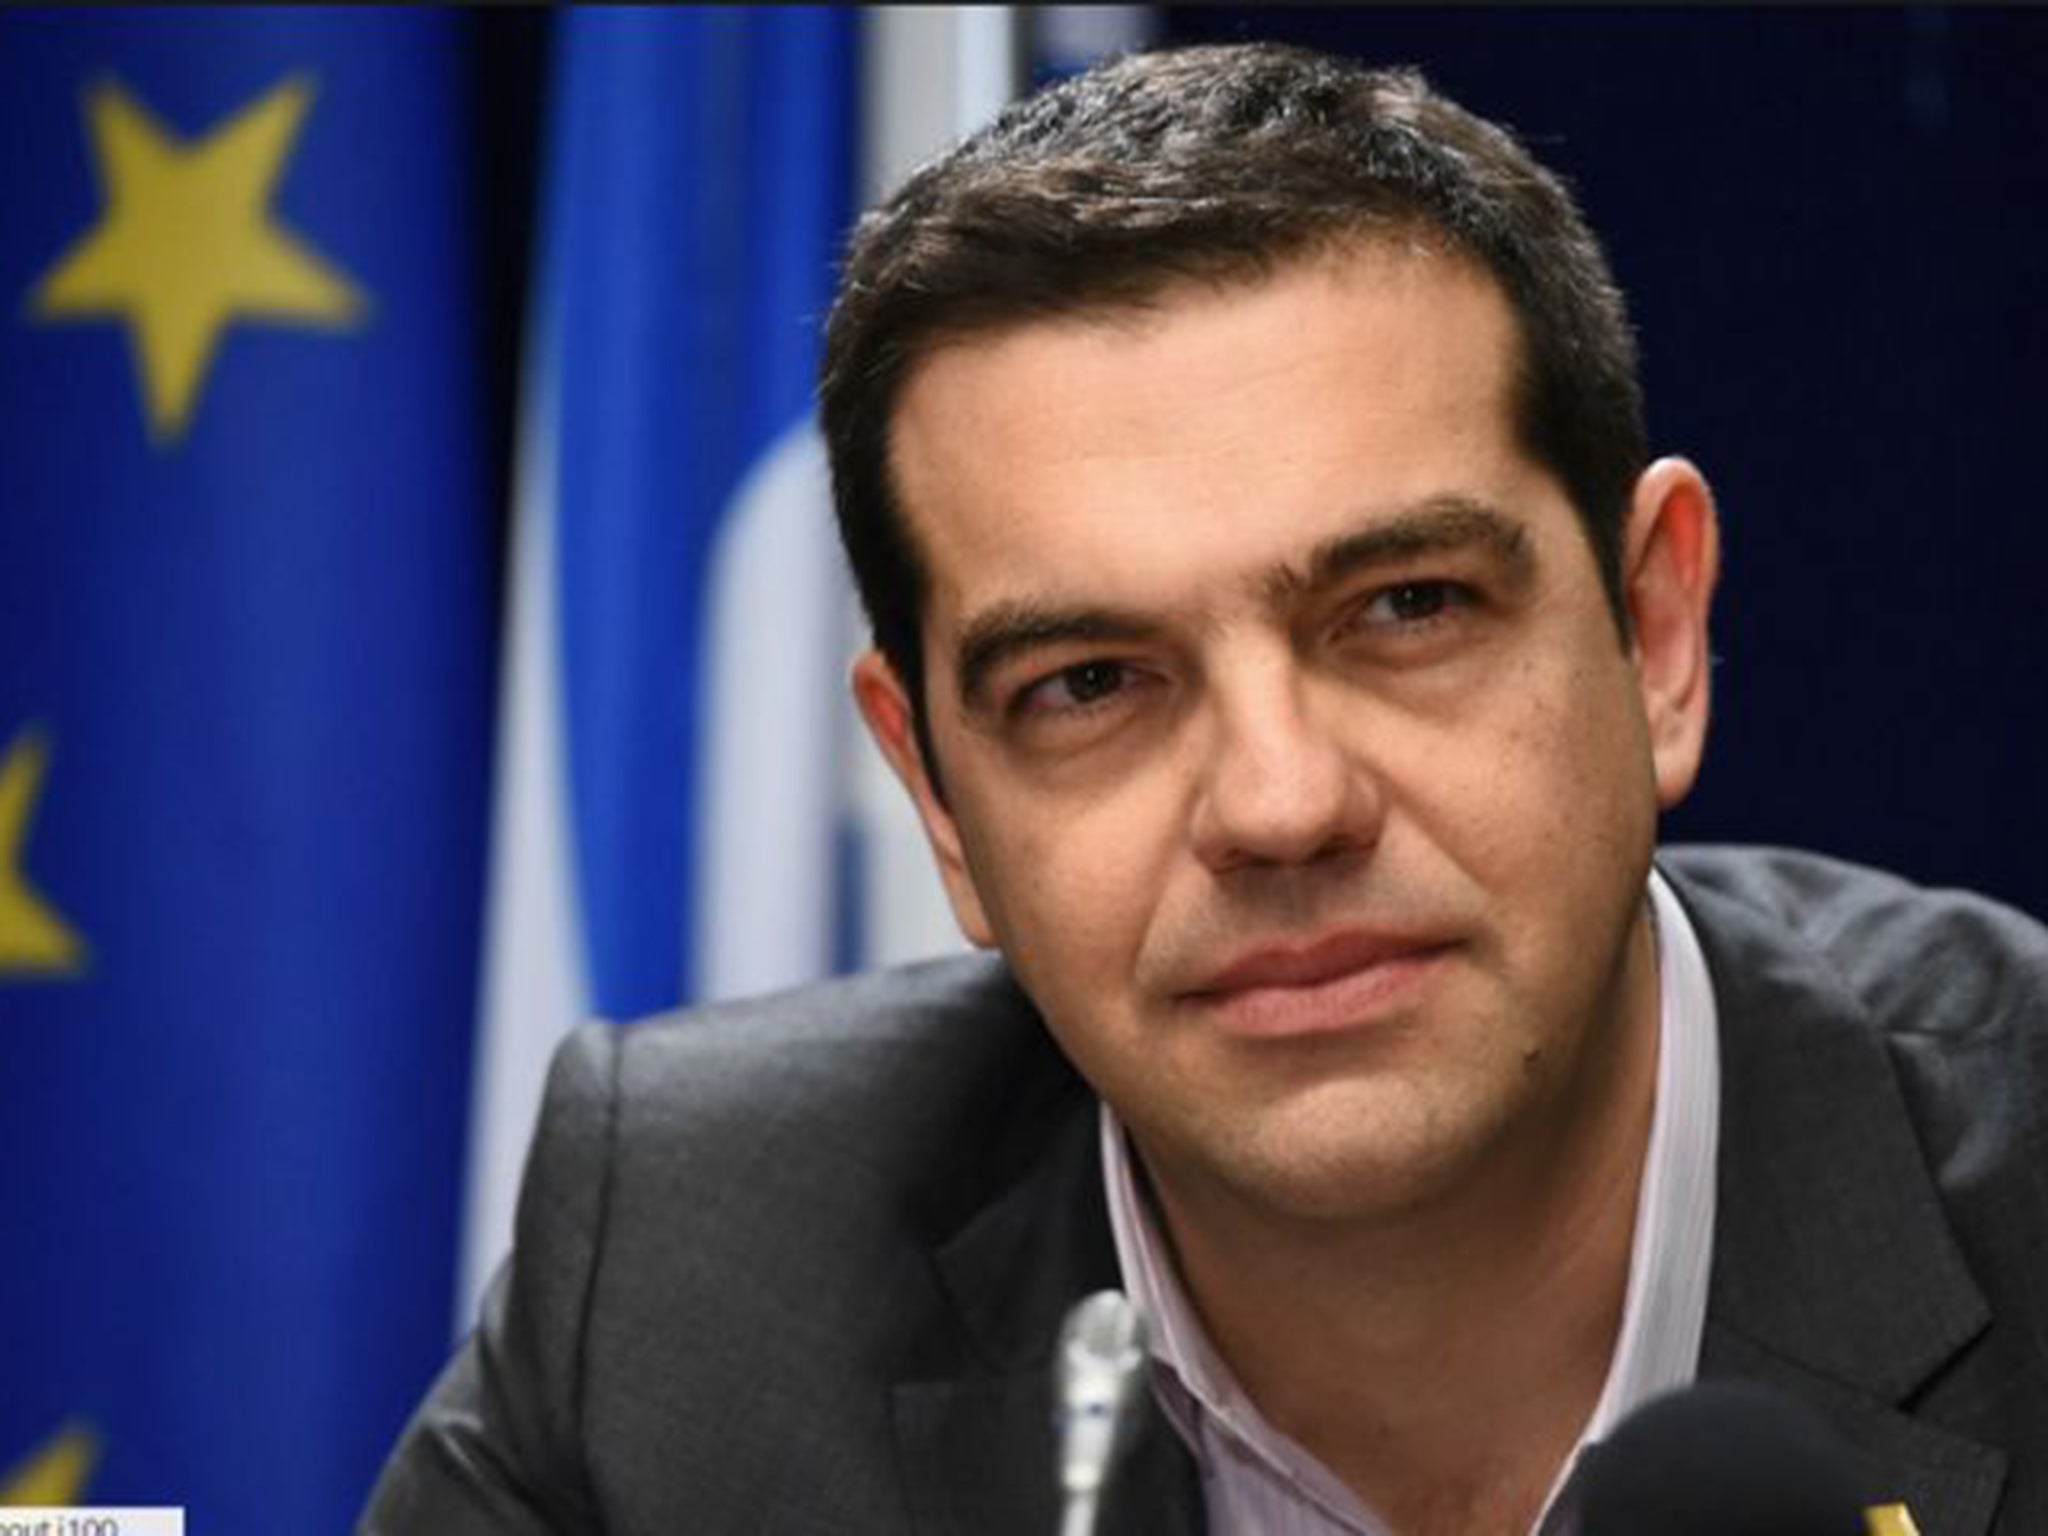 Alexis Tsipras: ‘This is not ideological stubbornness’